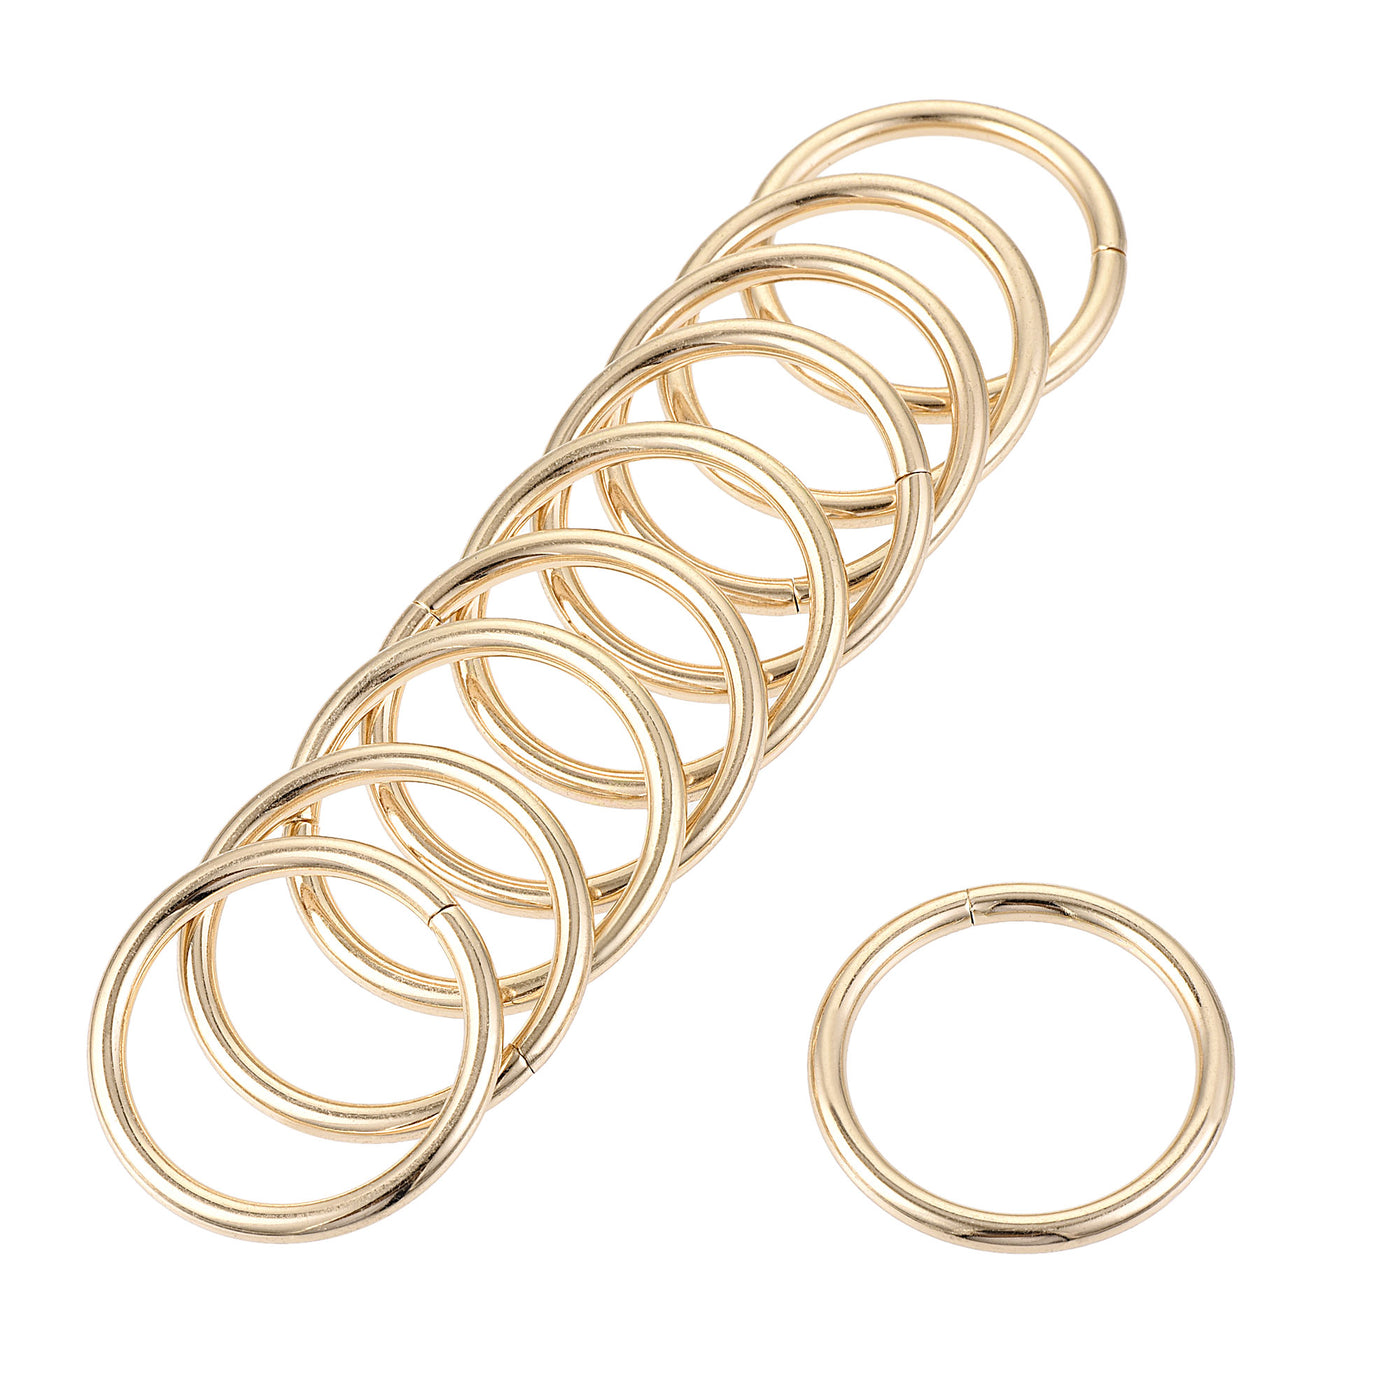 uxcell Uxcell 25mm Metal O Rings Non-Welded for Straps Bags Belts DIY Gold Tone 20pcs